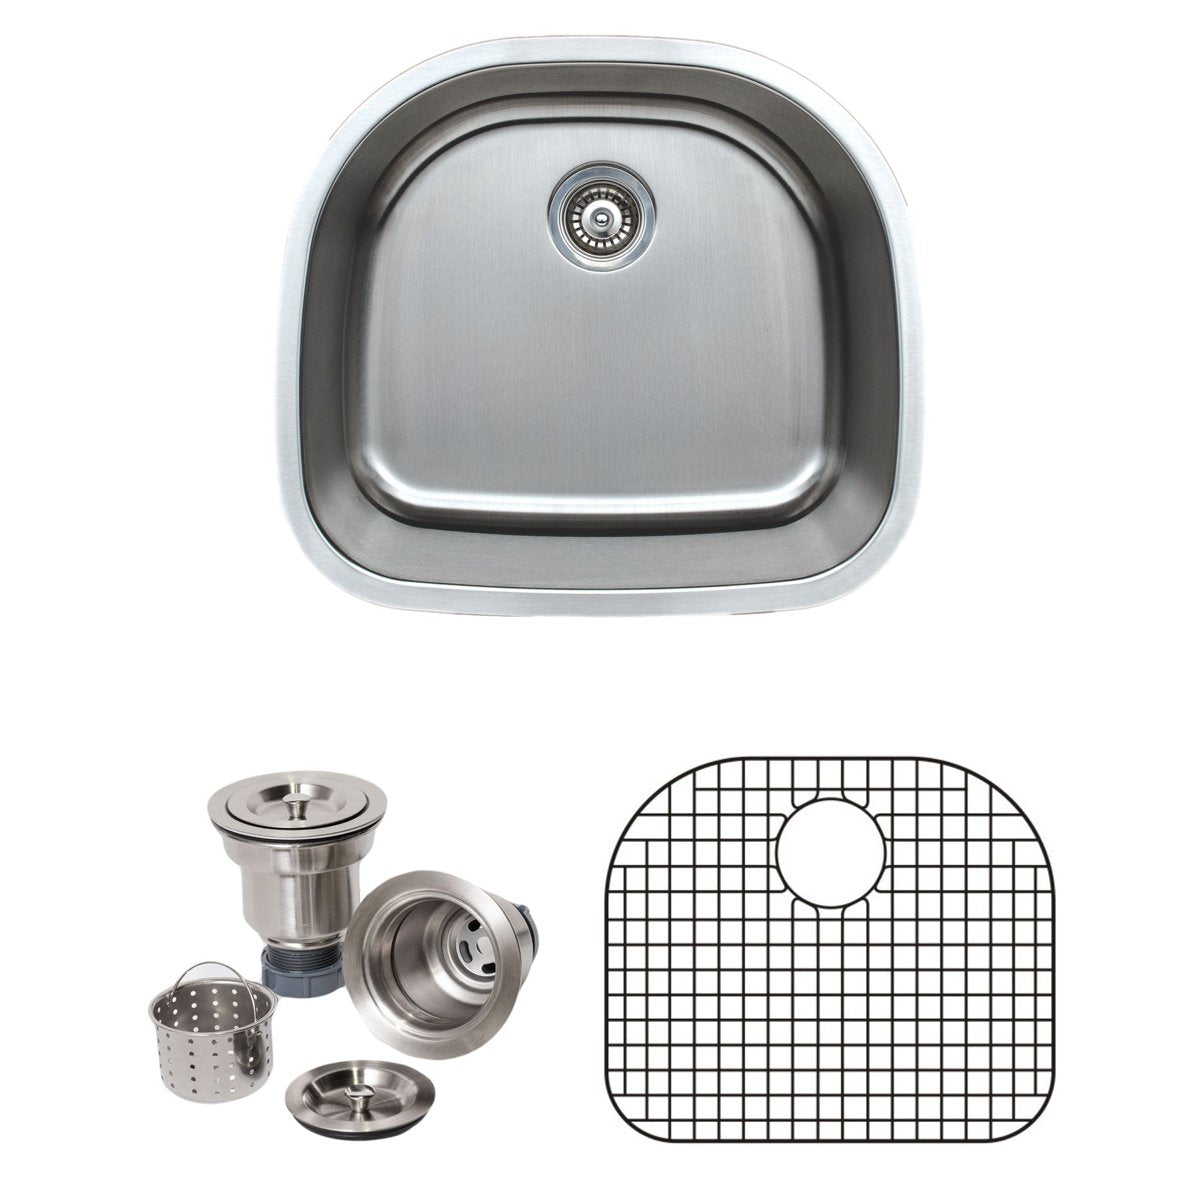 Wells Sinkware 24-Inch 18-Gauge Undermount D-shaped Single Bowl Stainless Steel Kitchen Sink with Grid Rack and Basket Strainer-Kitchen Sinks Fast Shipping at Directsinks.